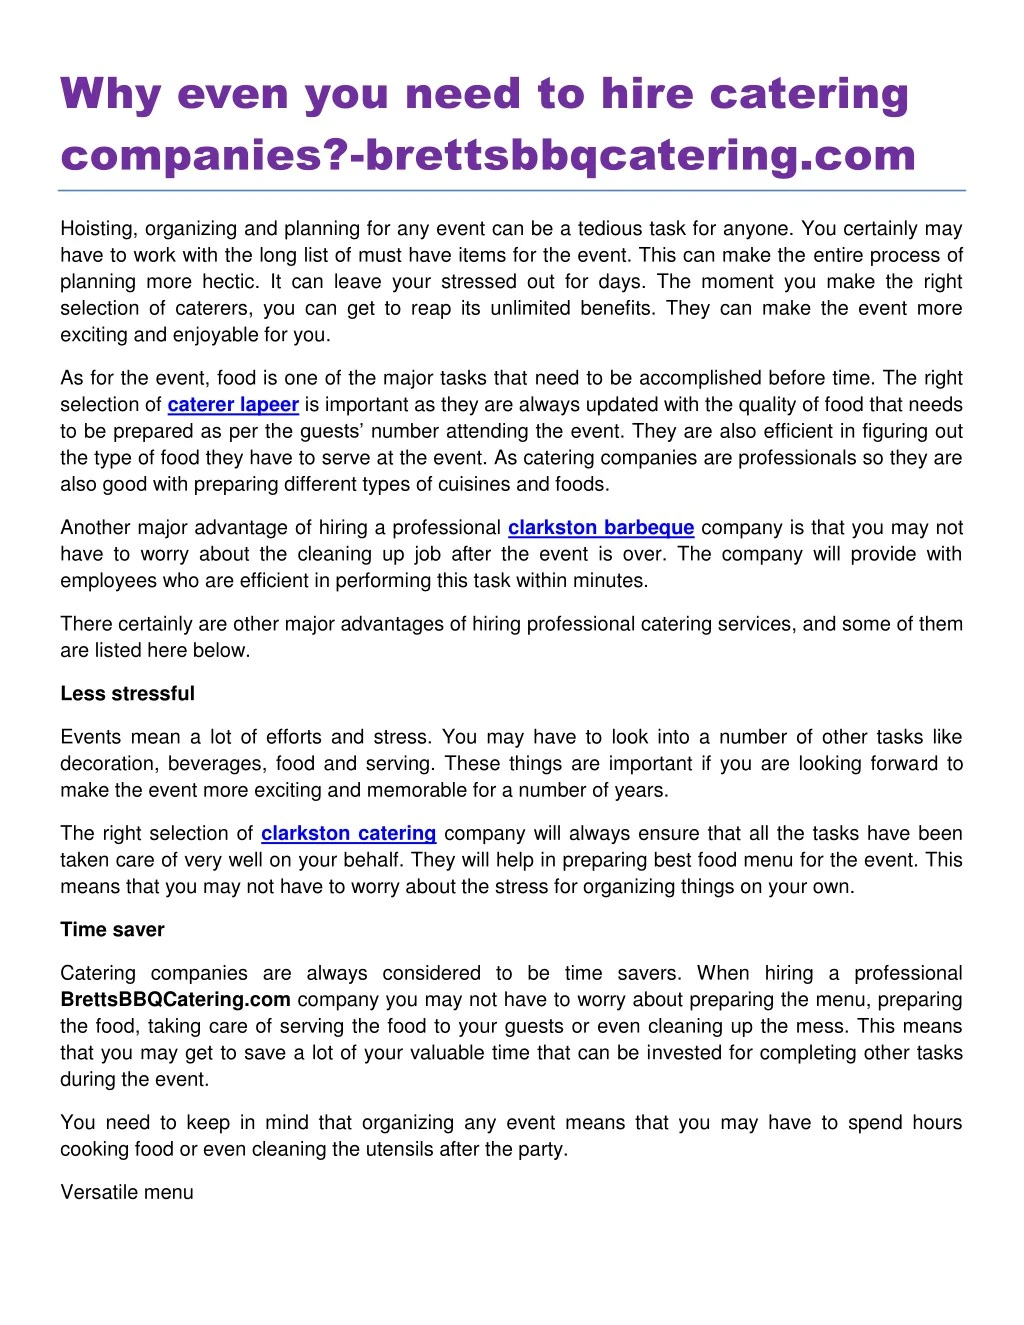 why even you need to hire catering companies